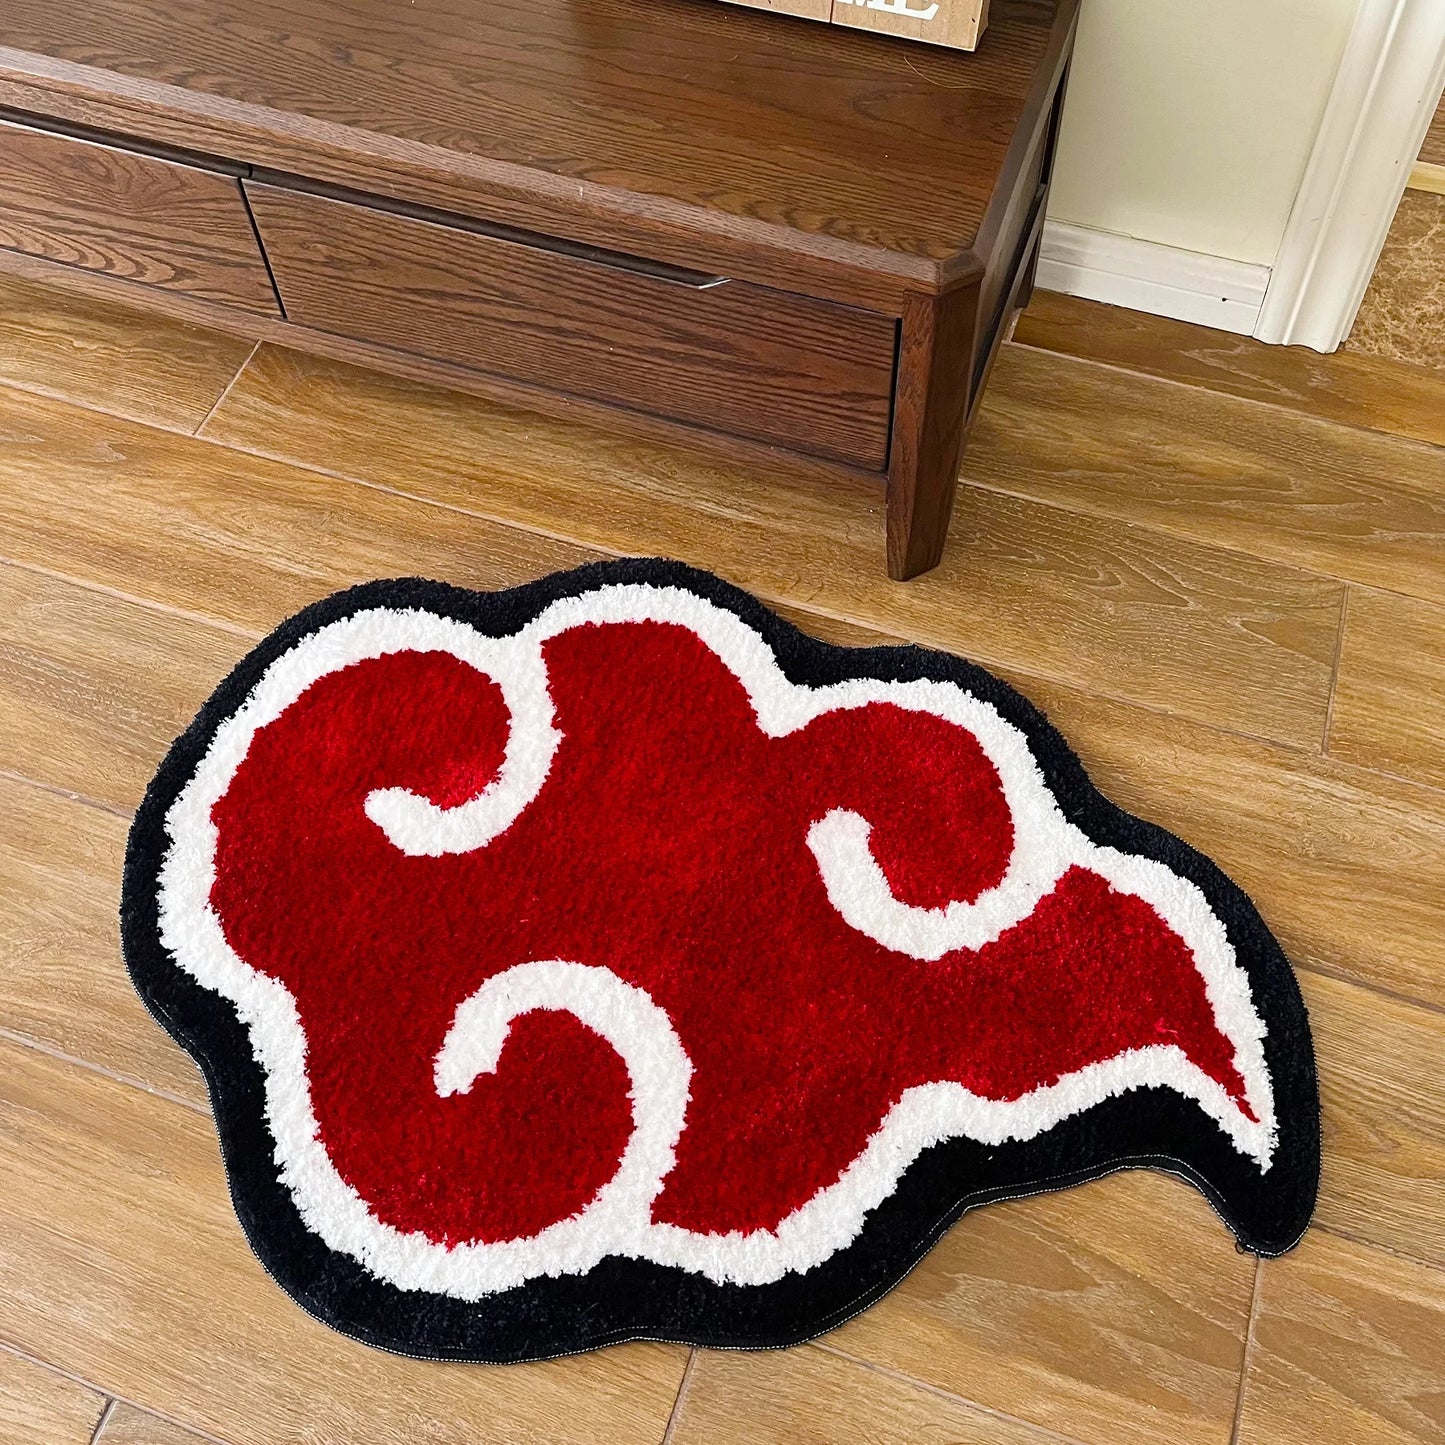 Anime Red Cloud Doormat - Handmade Tufted Rug for Kitchen and Bedroom